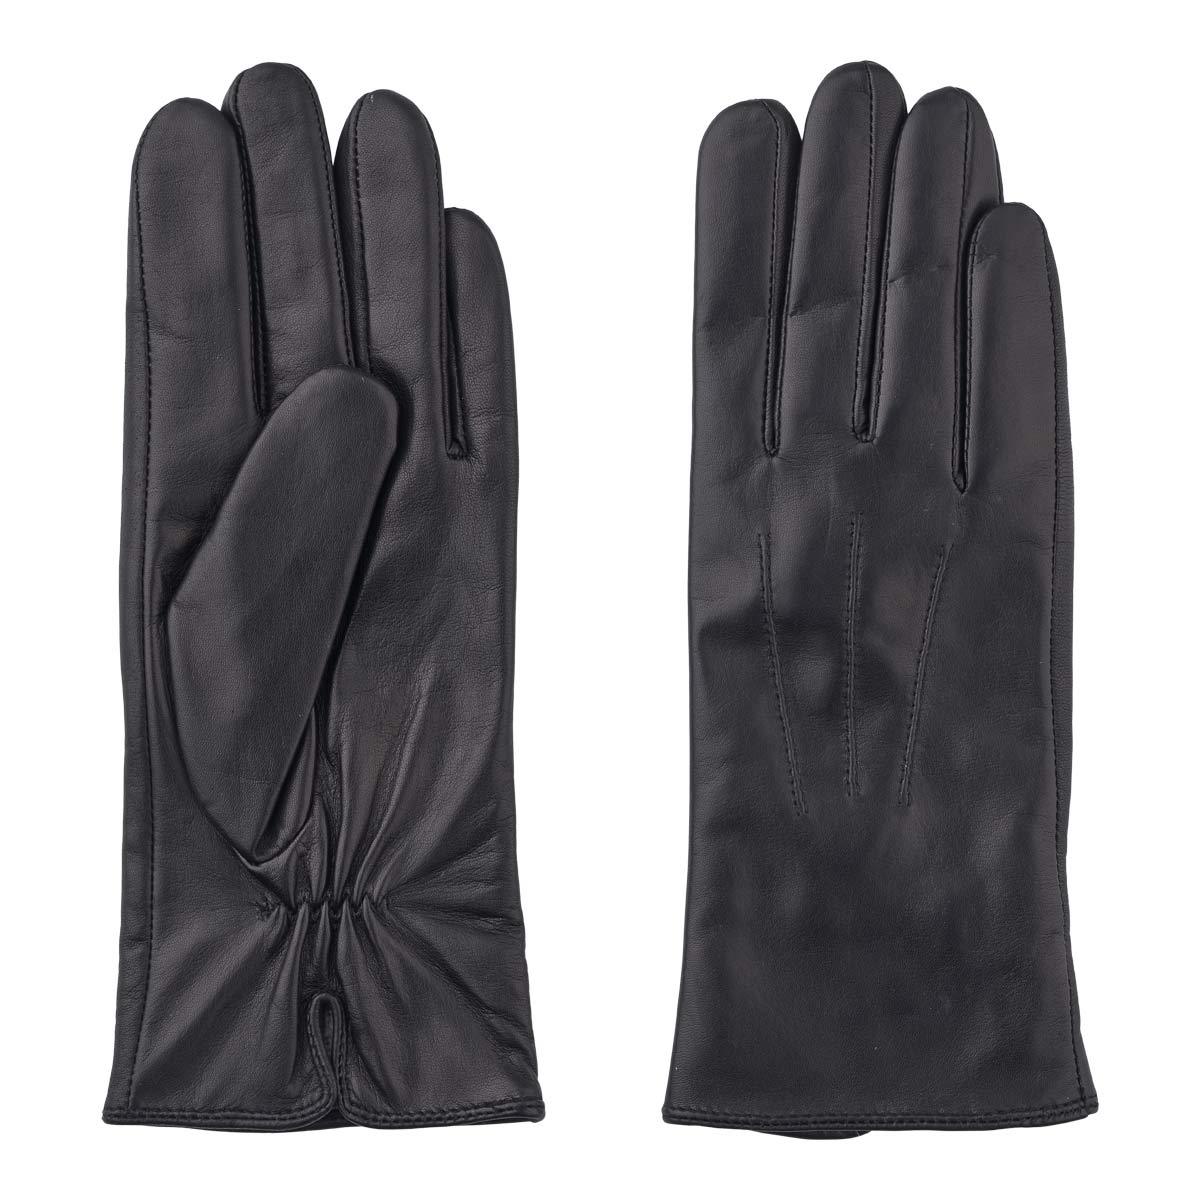 GLOVES BLACK LEATHER (Available in 2 Sizes)